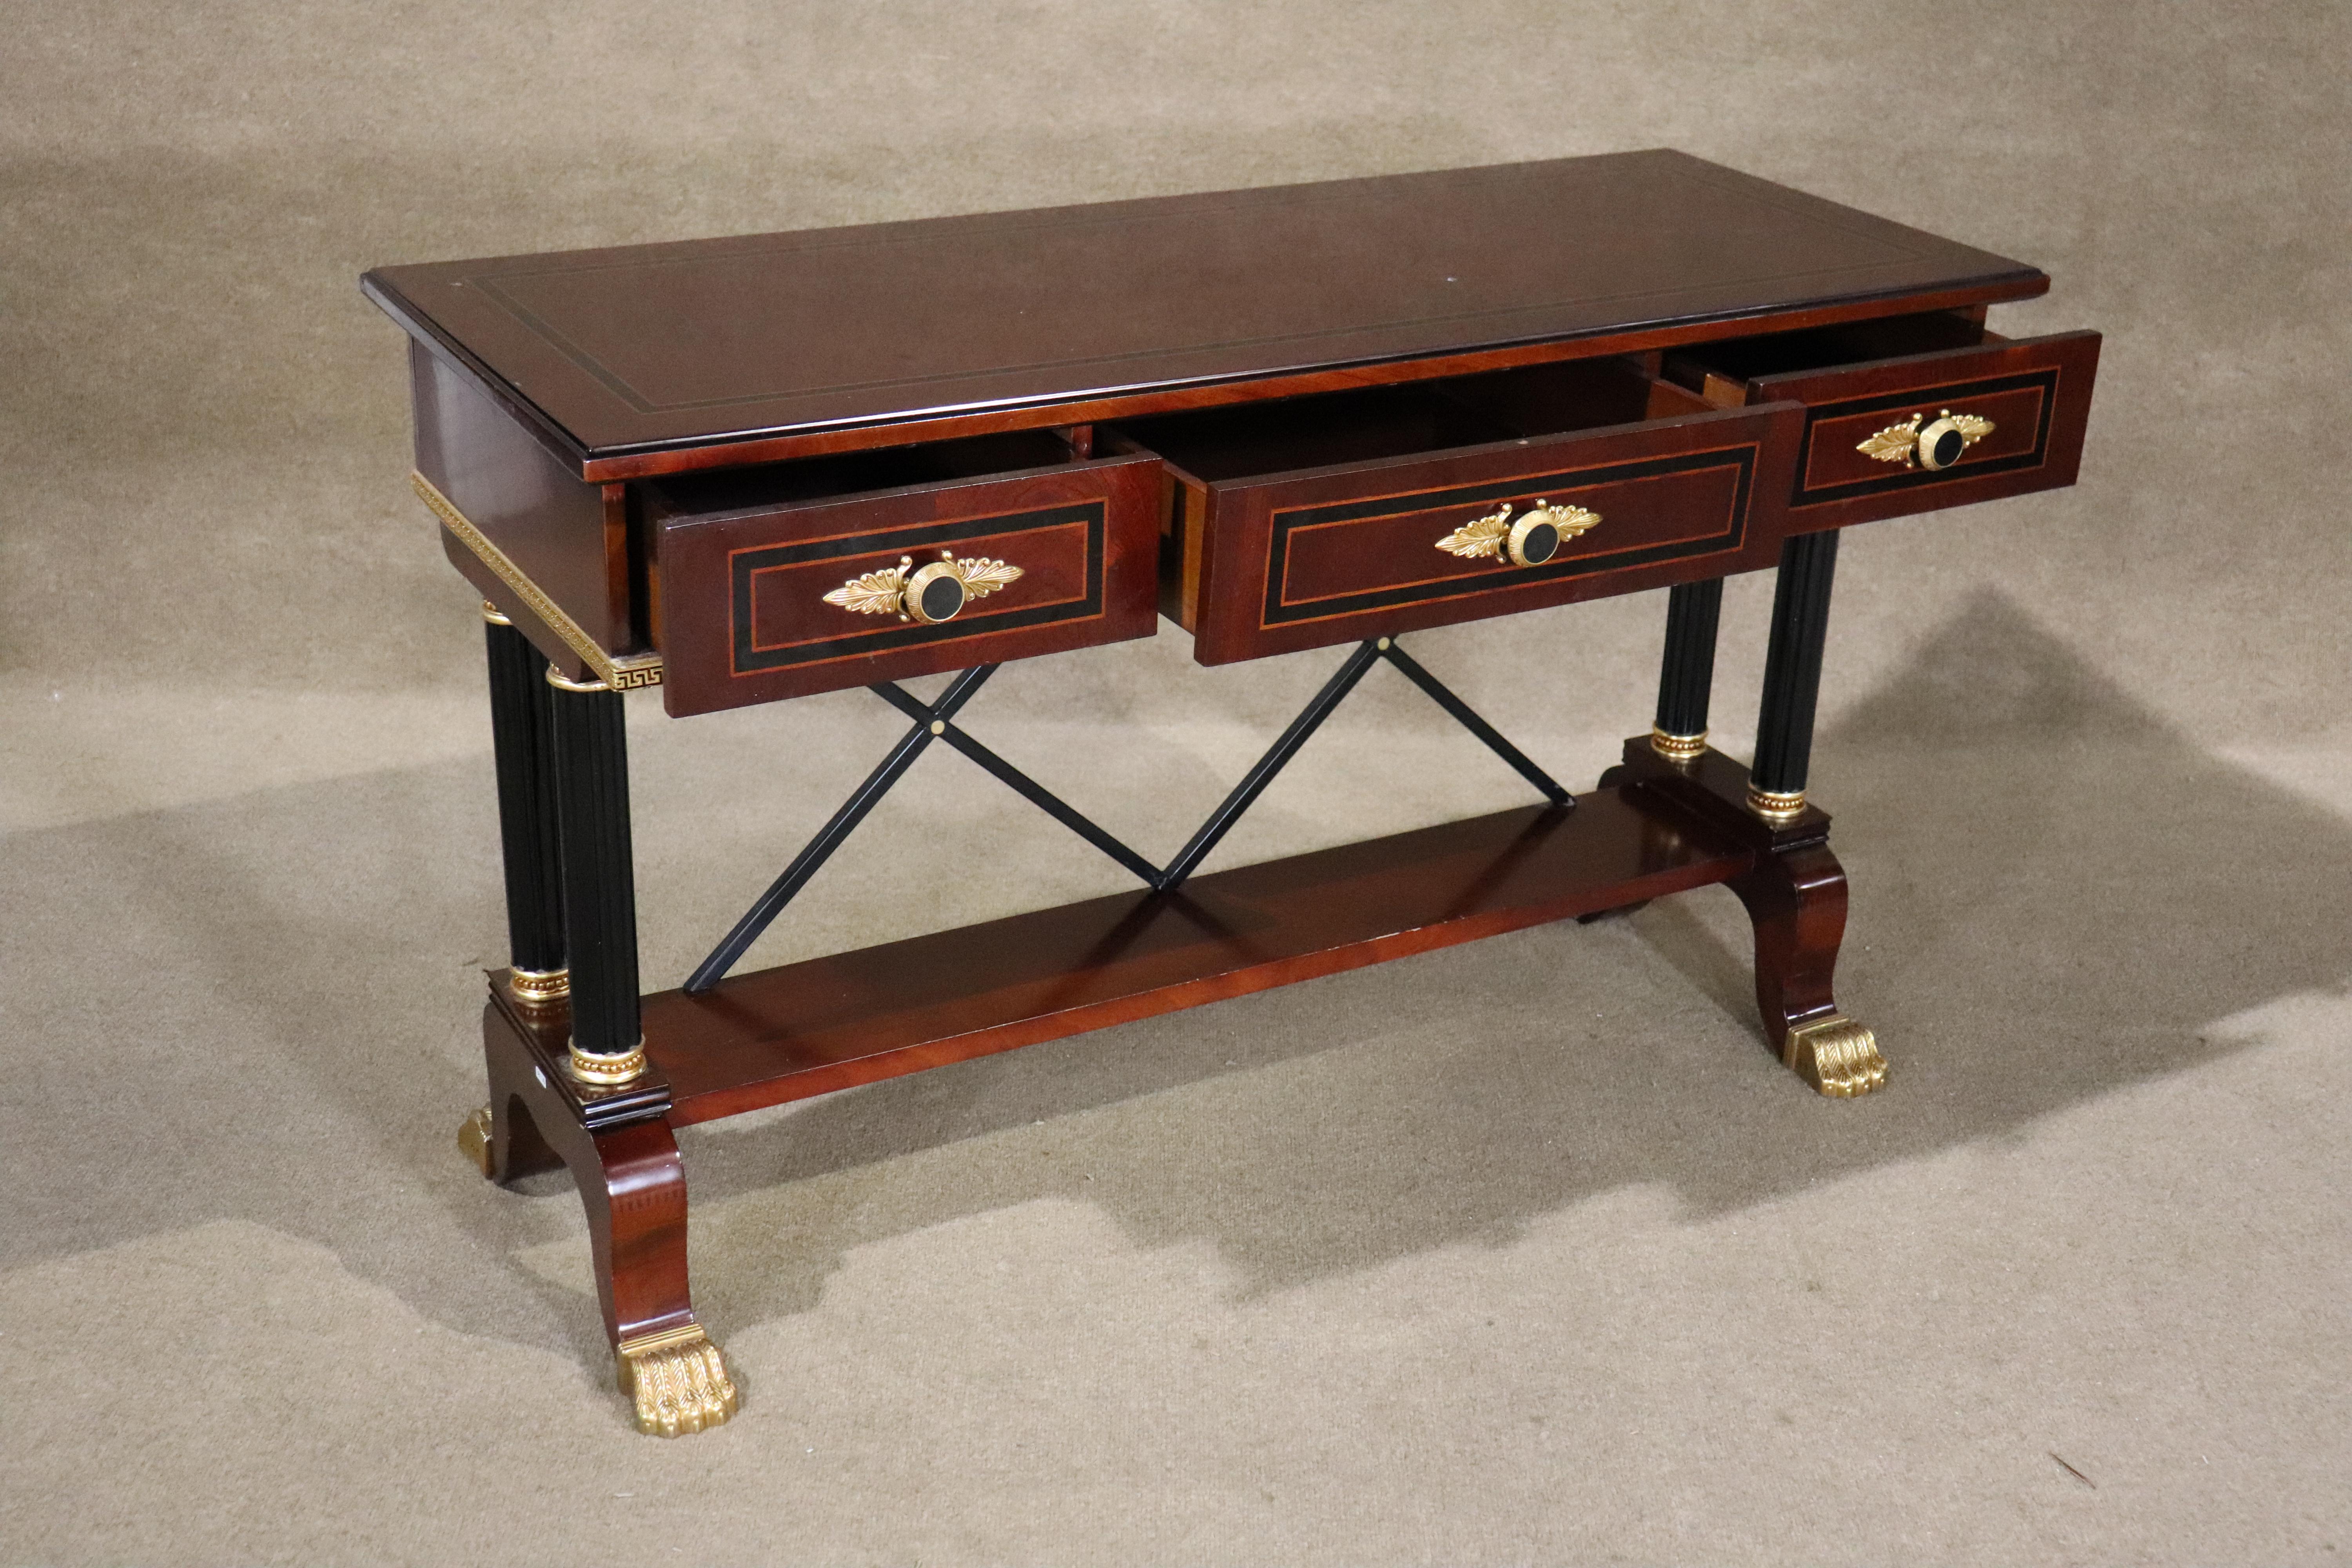 This Empire style console table features golden claw feet, criss-cross back, and inlay top trim. Great for entry way or behind a sofa.
Please confirm location NY or NJ